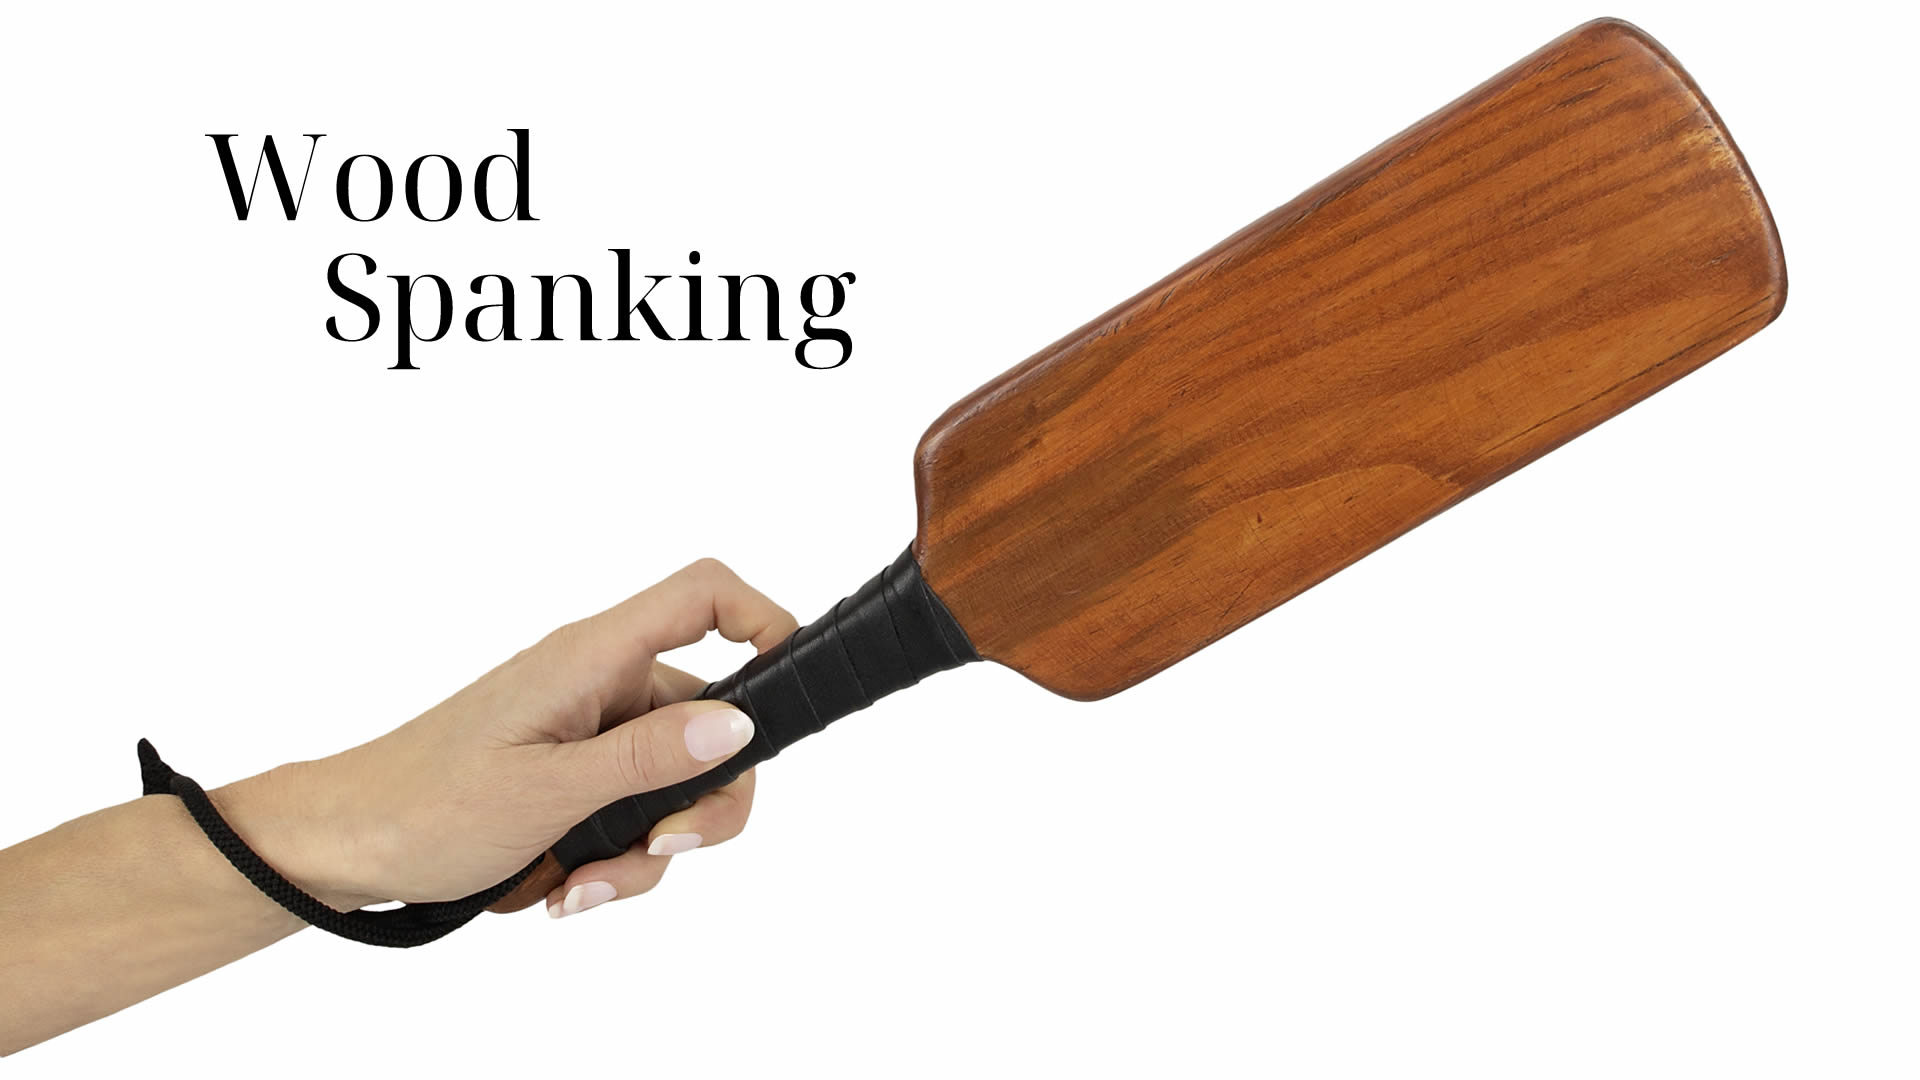 Spanking Paddle made of Wood with Leather Grip